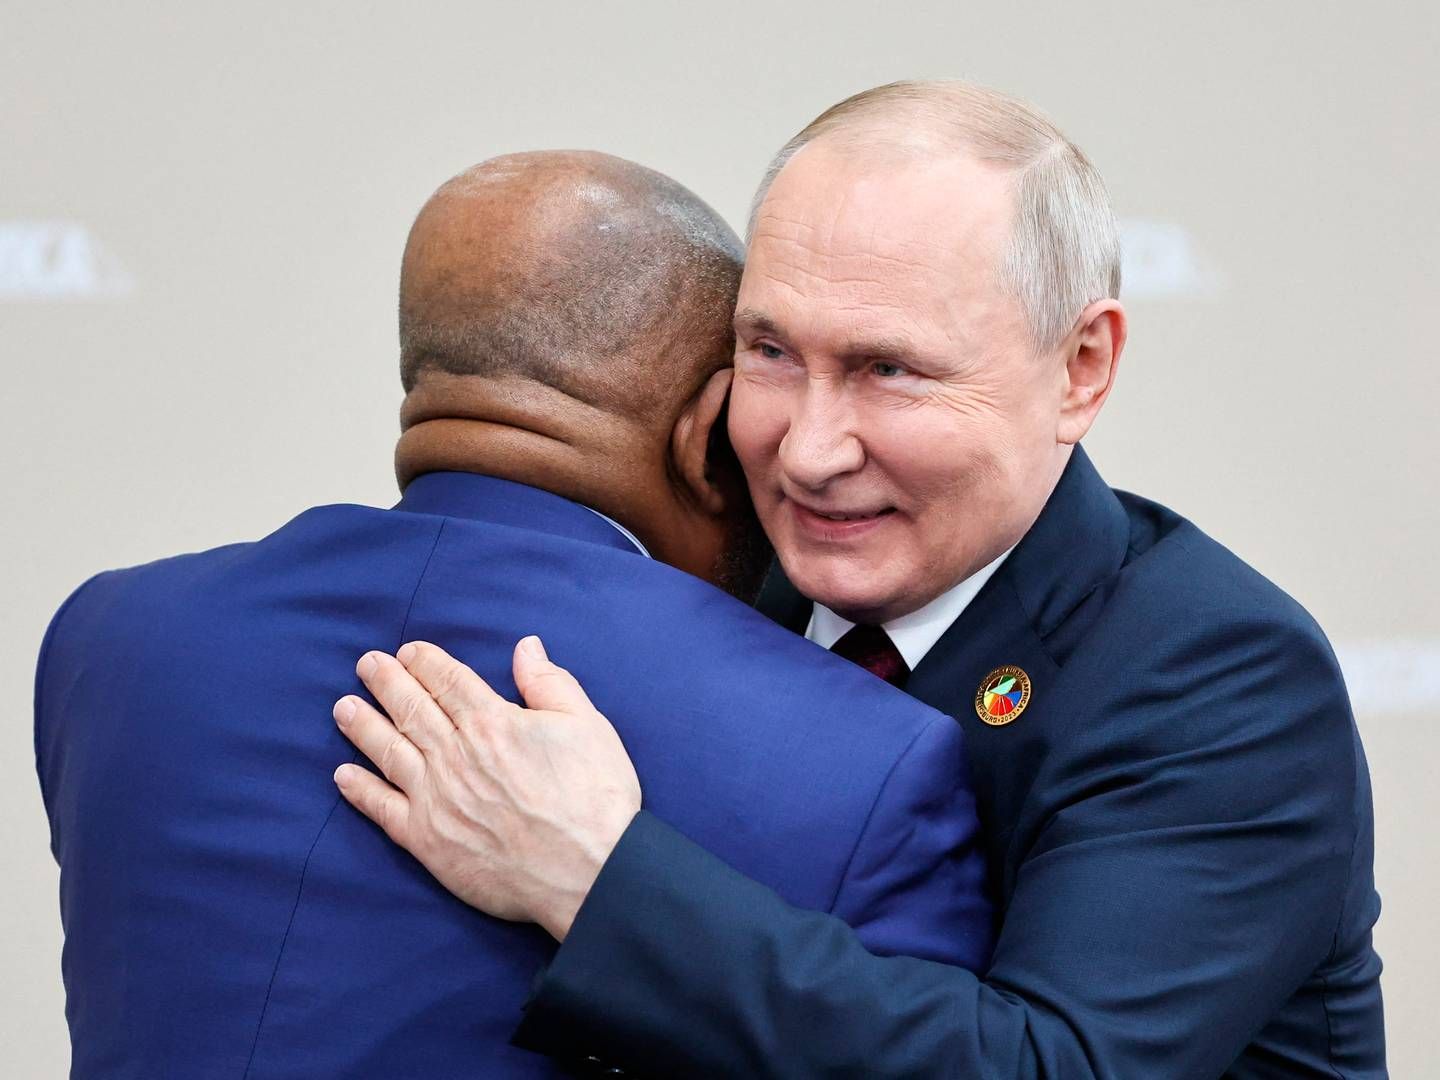 Vladimir Putin met with the leaders of several African countries at a summit in St. Petersburg on Thursday. Here he hugs Azali Assoumani, chairman of the African Union. | Photo: Mikhail Tereshchenko/AFP/Ritzau Scanpix